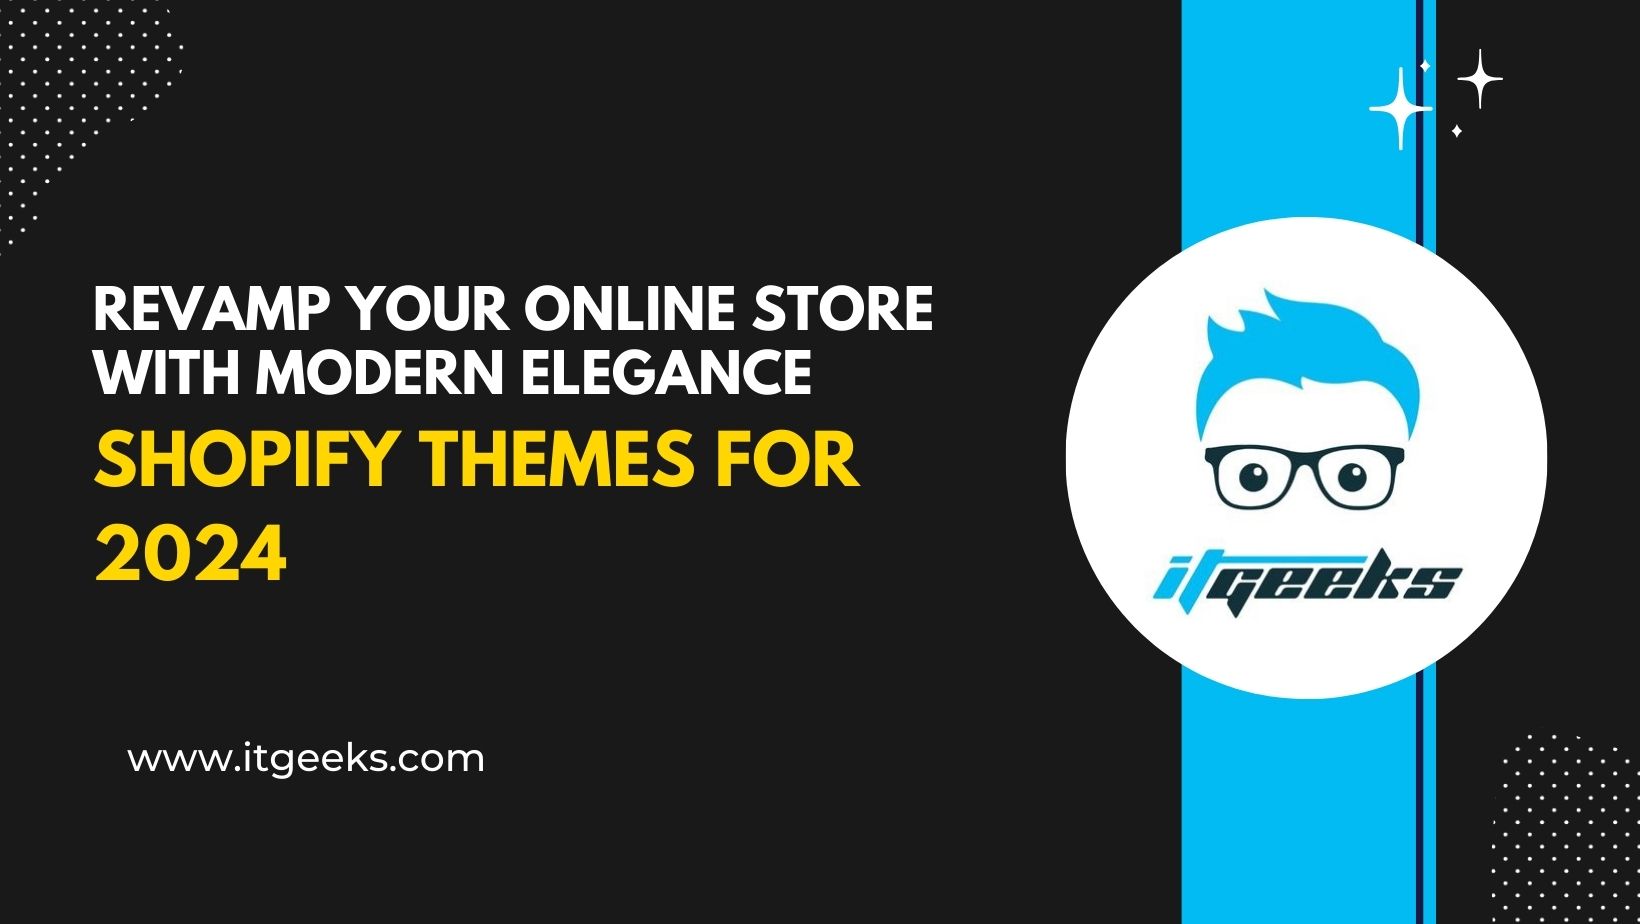 Revamp Your Online Store with Modern Elegance: Shopify Themes for 2024